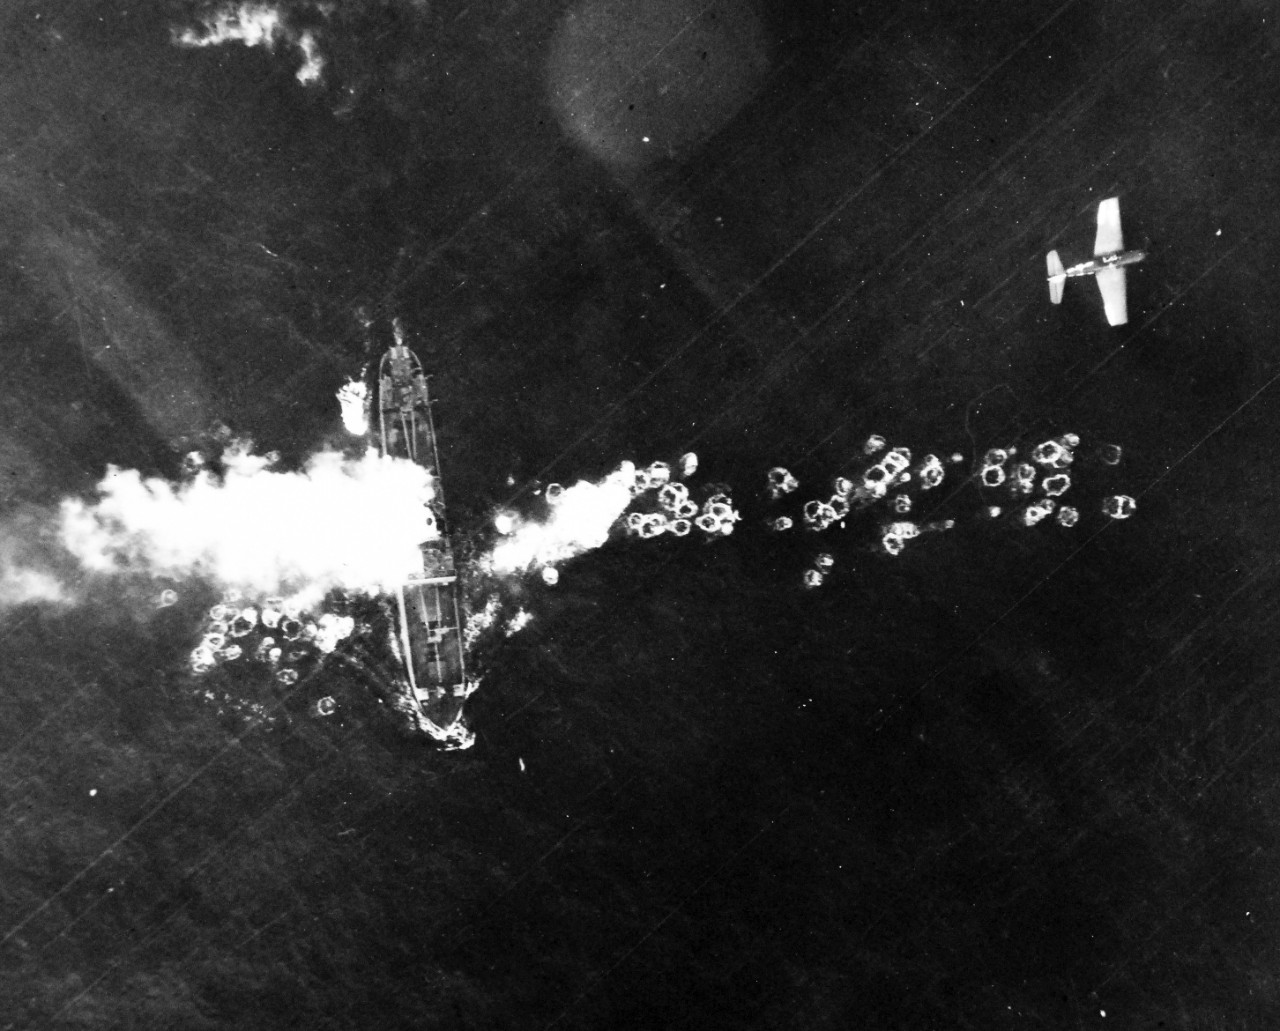 80-G-490117:  Raids on Japanese Home Islands, July  15, 1945.   Japanese freighter caught by carrier-based aircraft of the Third Fleet near Fukuya Wan, Hokkaido, Japan, starts to burn following a strafing run by F6F “Hellcat” plane seen near top of photograph, July 15, 1945.  U.S. Navy Photograph, now in the collections of the National Archives. (2015/12/08).